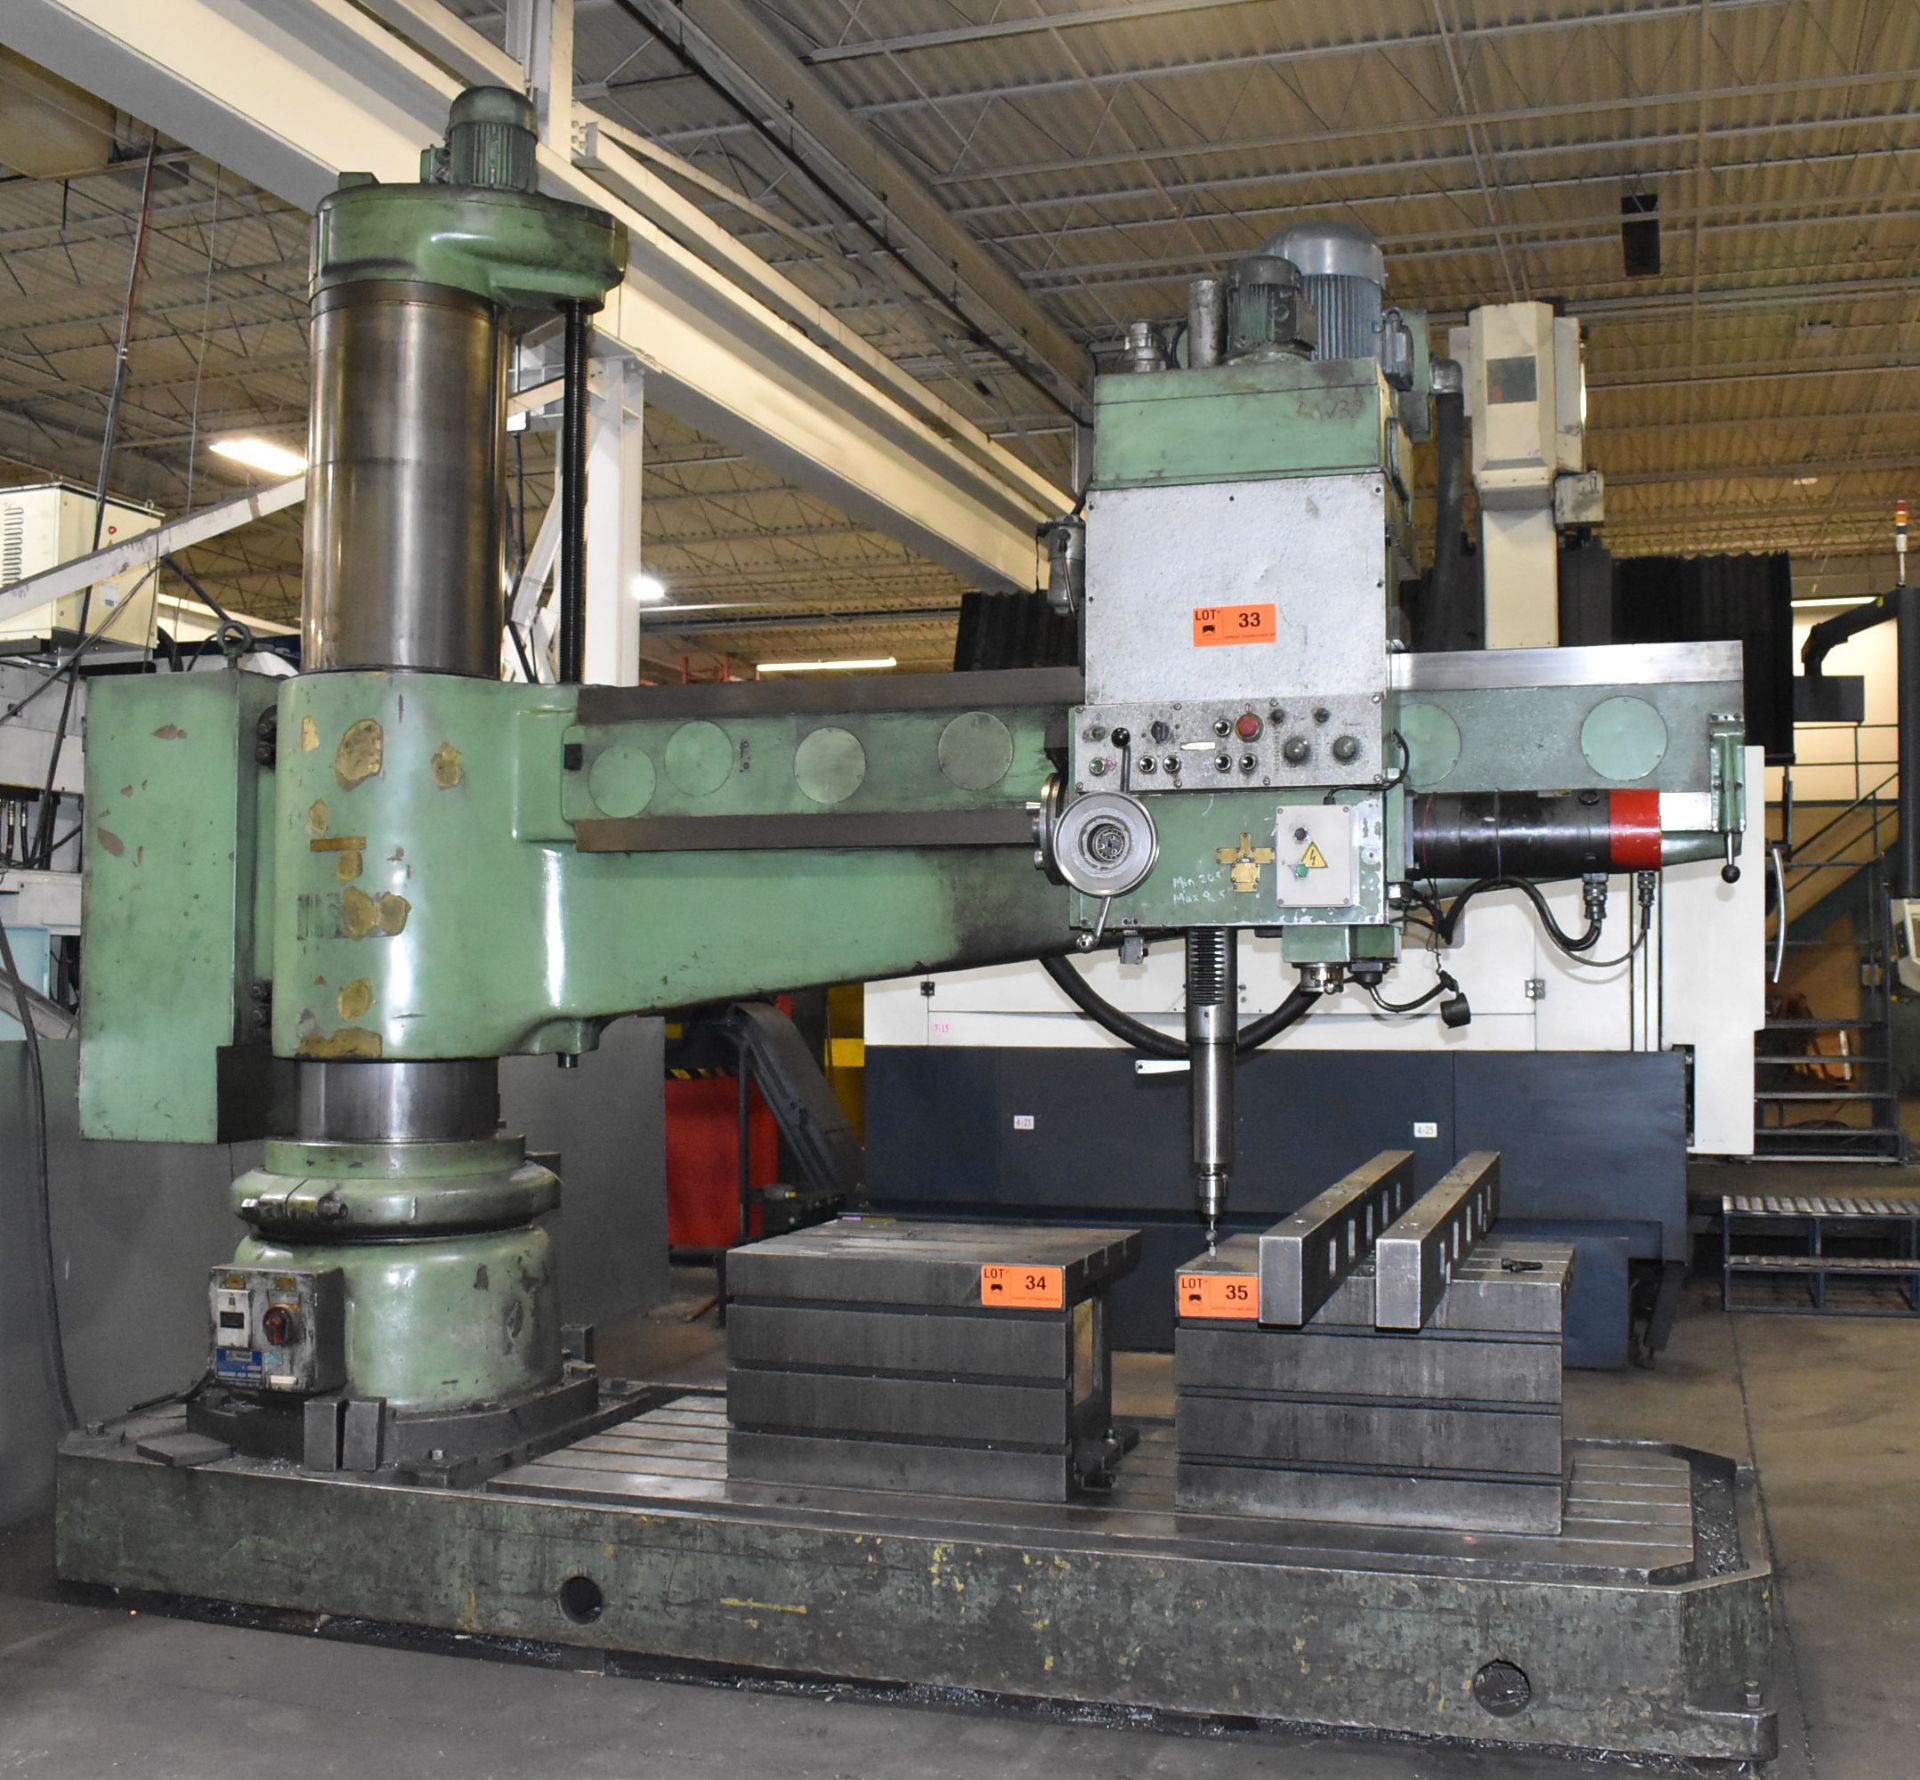 STANKO 2A576 9' RADIAL ARM DRILL WITH 21" COLUMN, SPEEDS TO 1800 RPM, 220V/3PH/60HZ, S/N 267 (CI) [